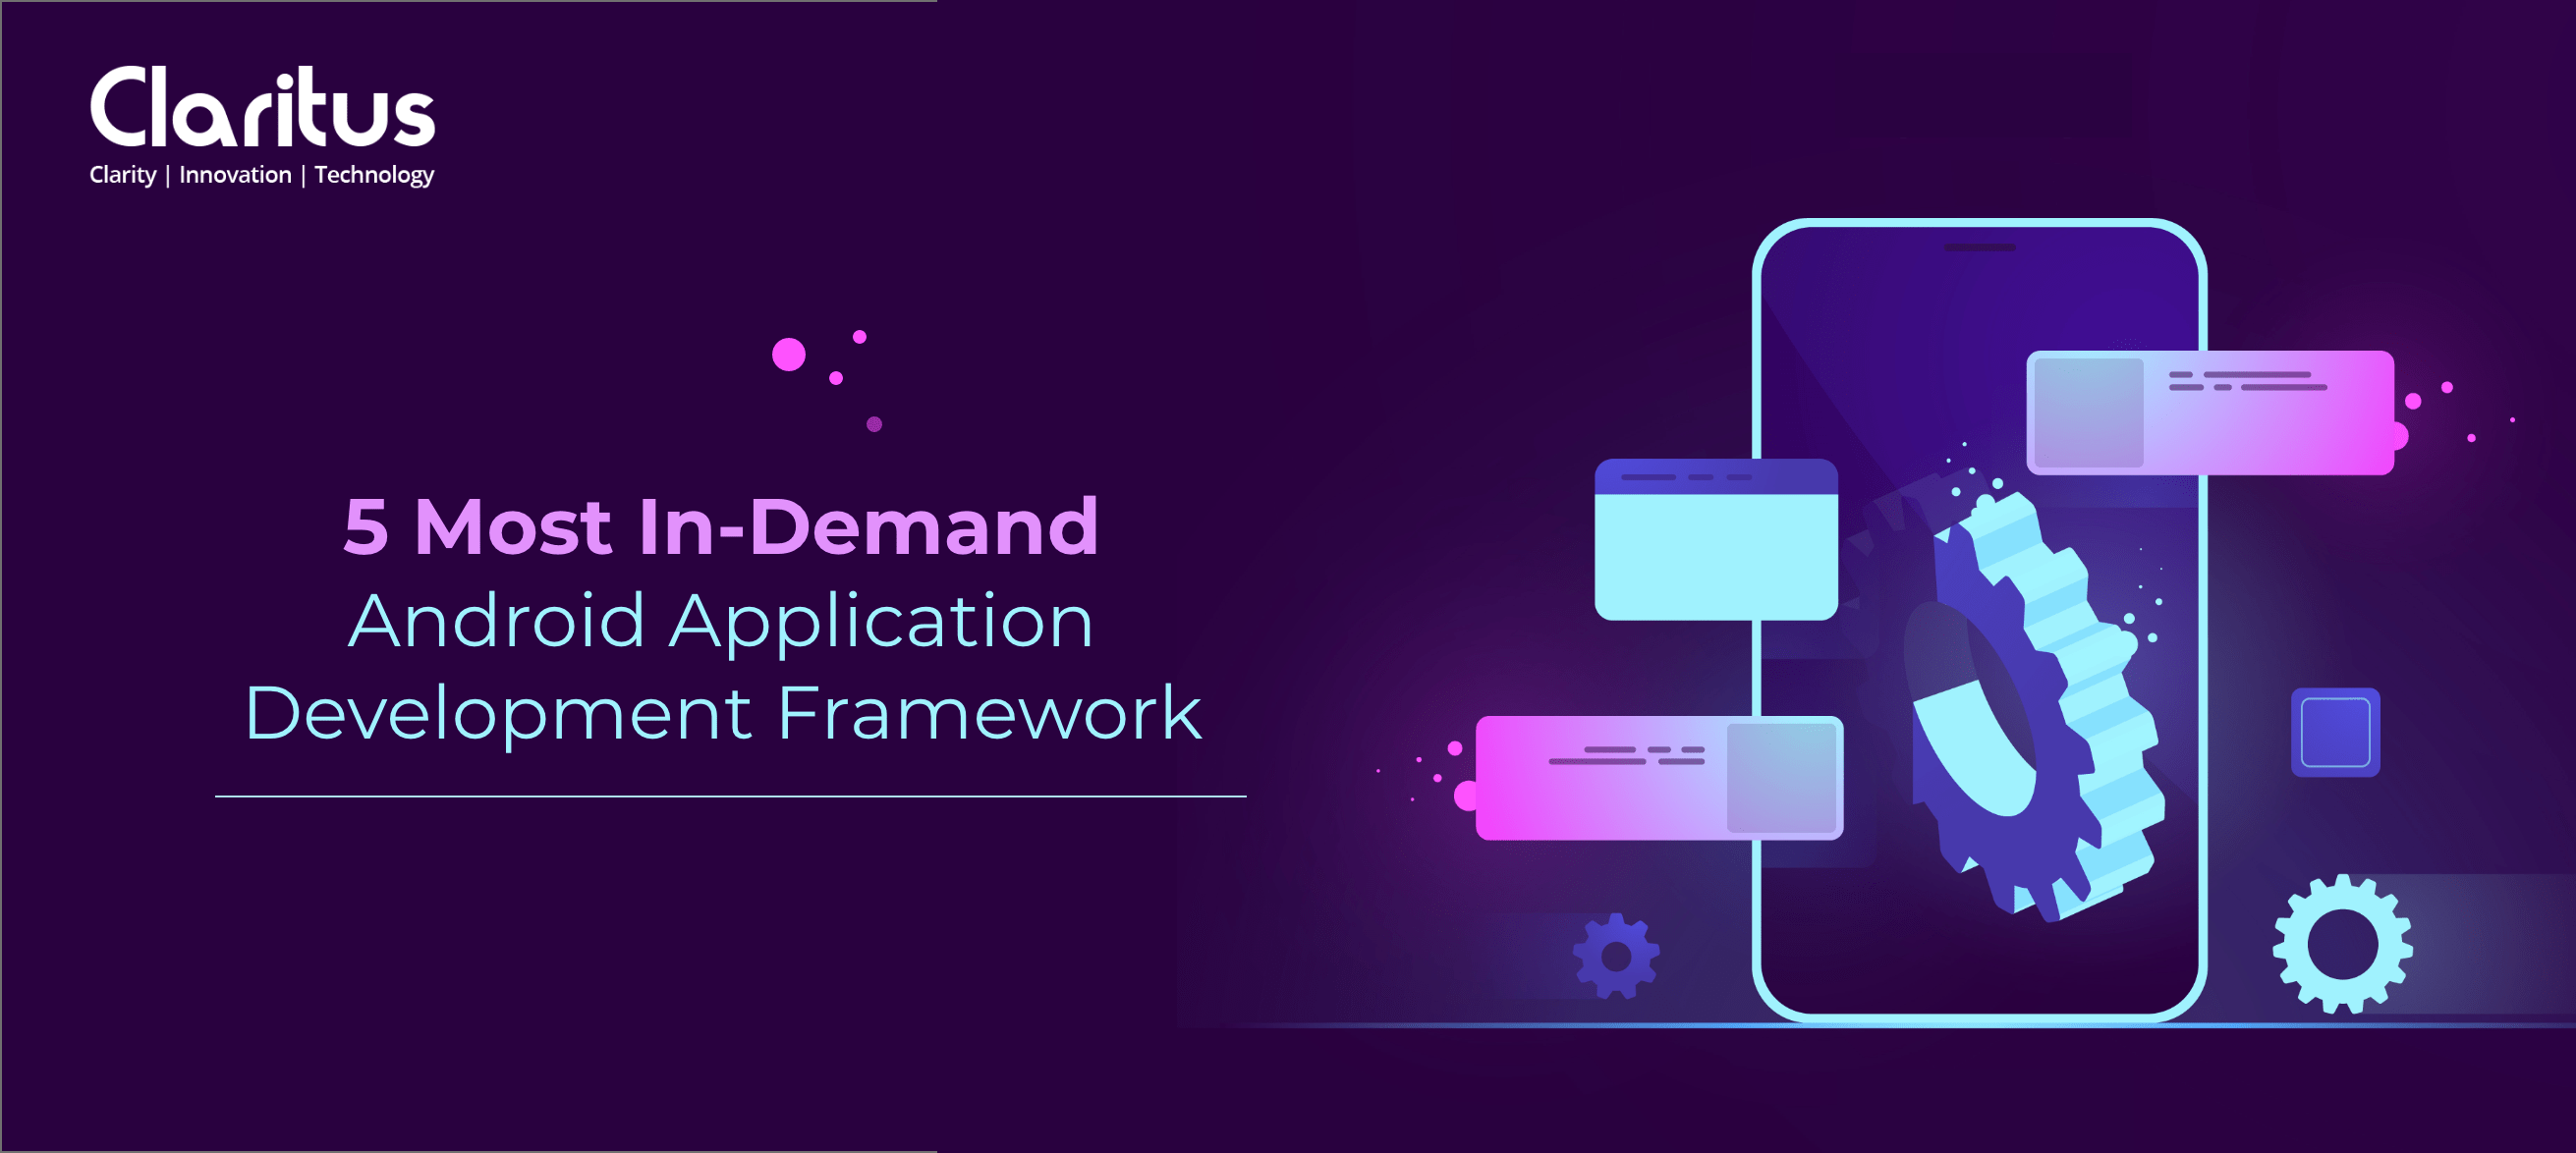 5 Most In-Demand Android Application Development Framework